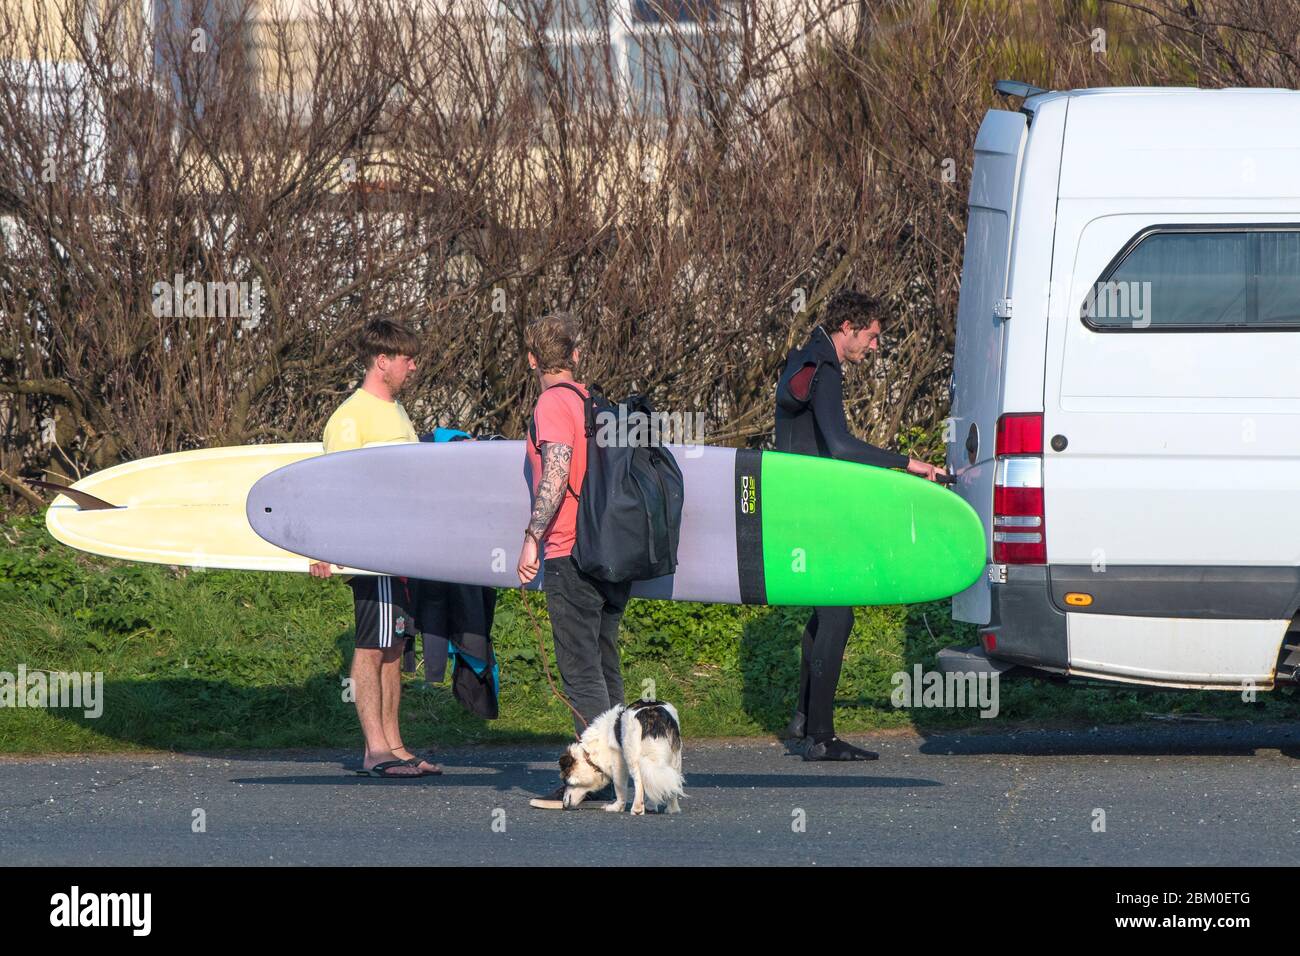 Surfers unloading surfboards from a van in preparation for a surfing session in Newquay in Cornwall. Stock Photo